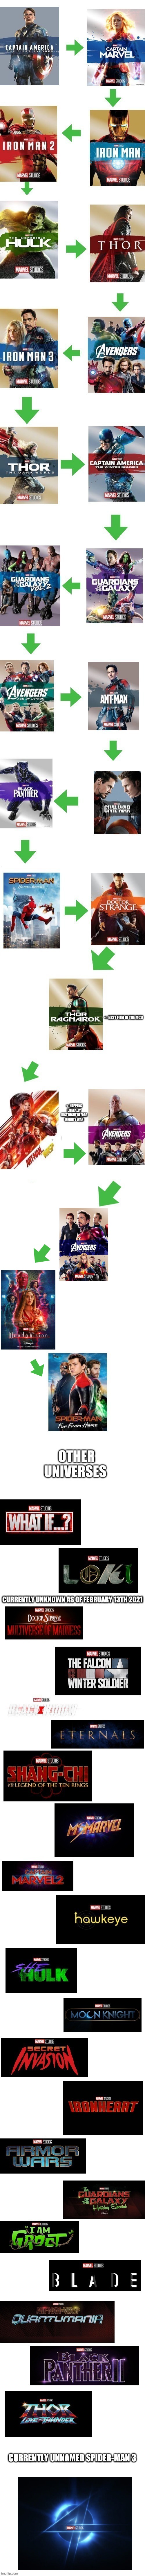 WoofWoof2's guide to watching the mcu (Marvel Cinematic Universe) in chronological order. | image tagged in mcu,marvel cinematic universe | made w/ Imgflip meme maker